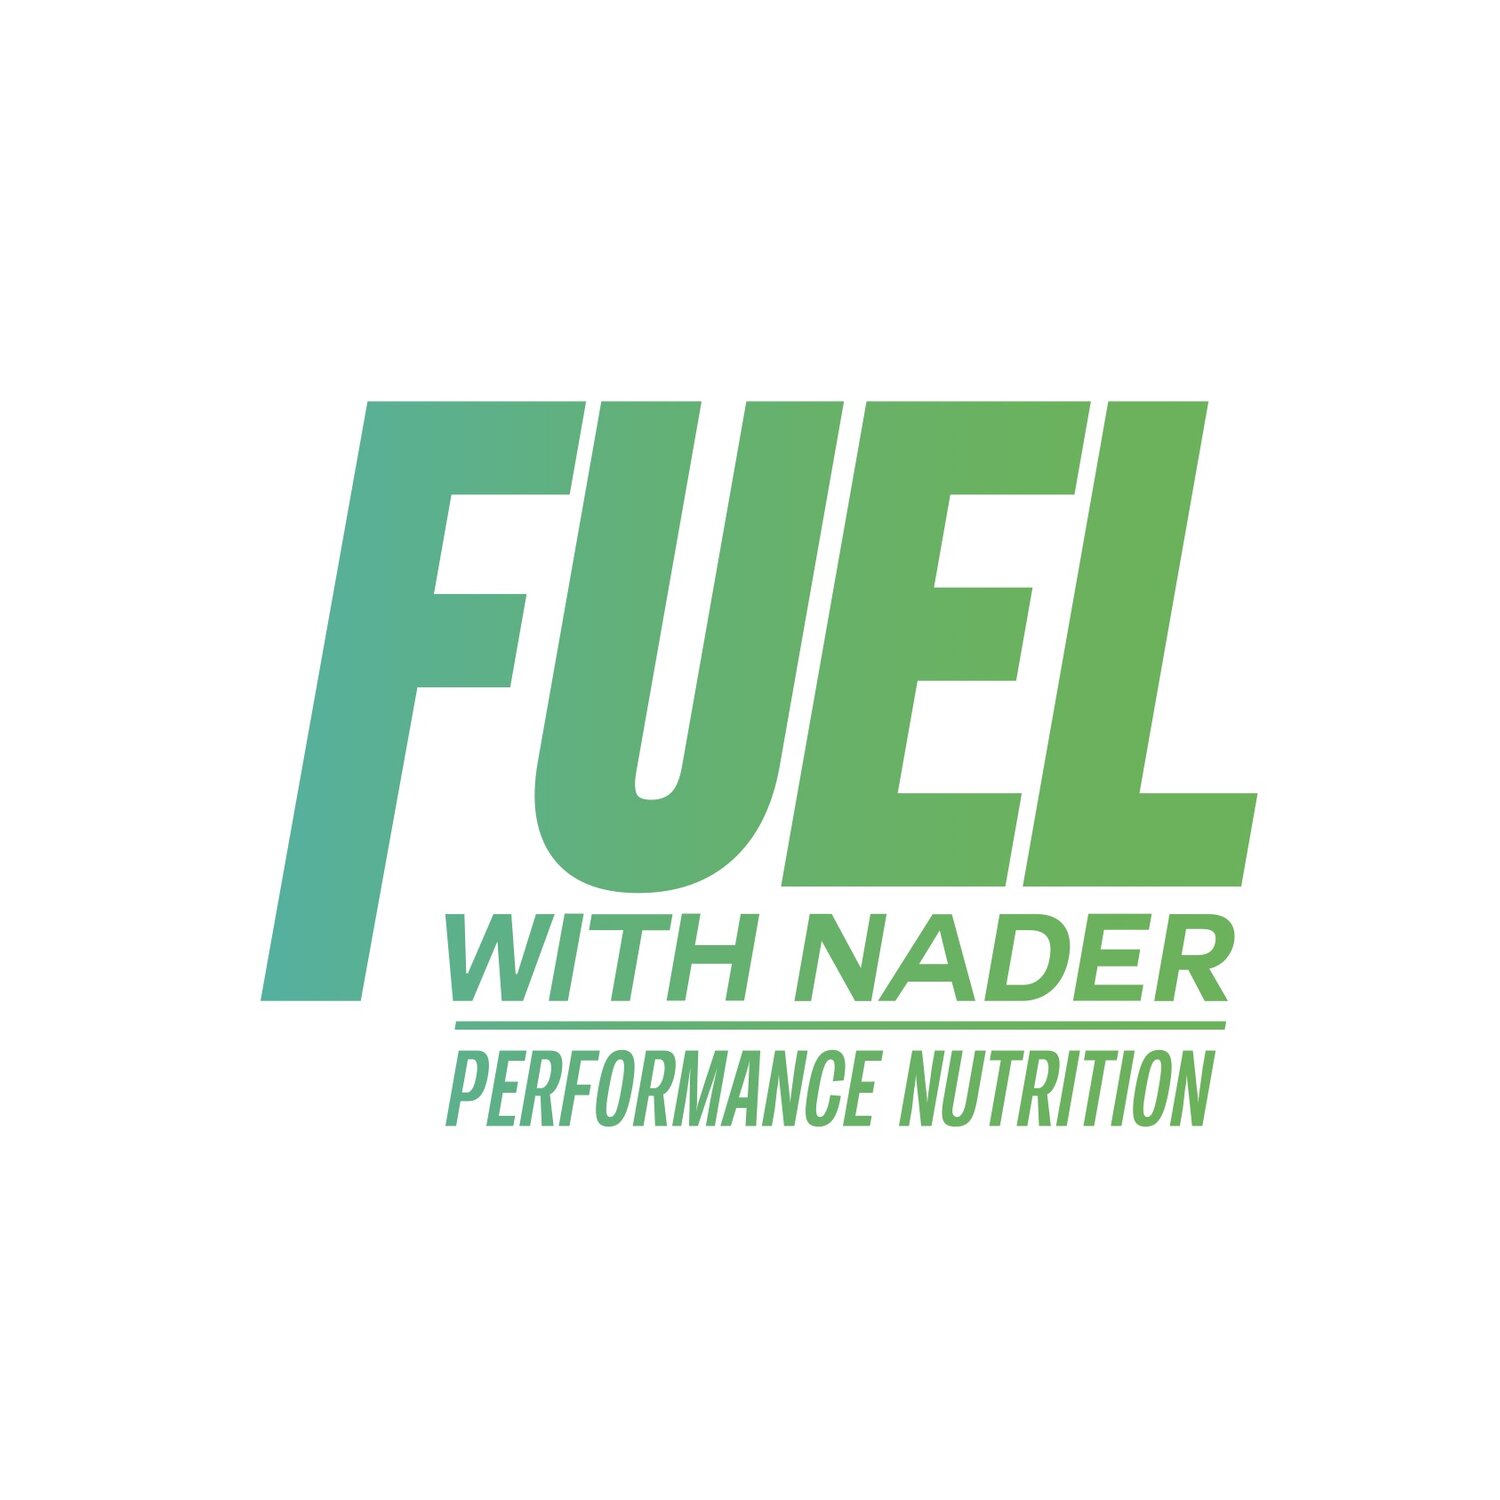 Fuel Up Performance Nutrition